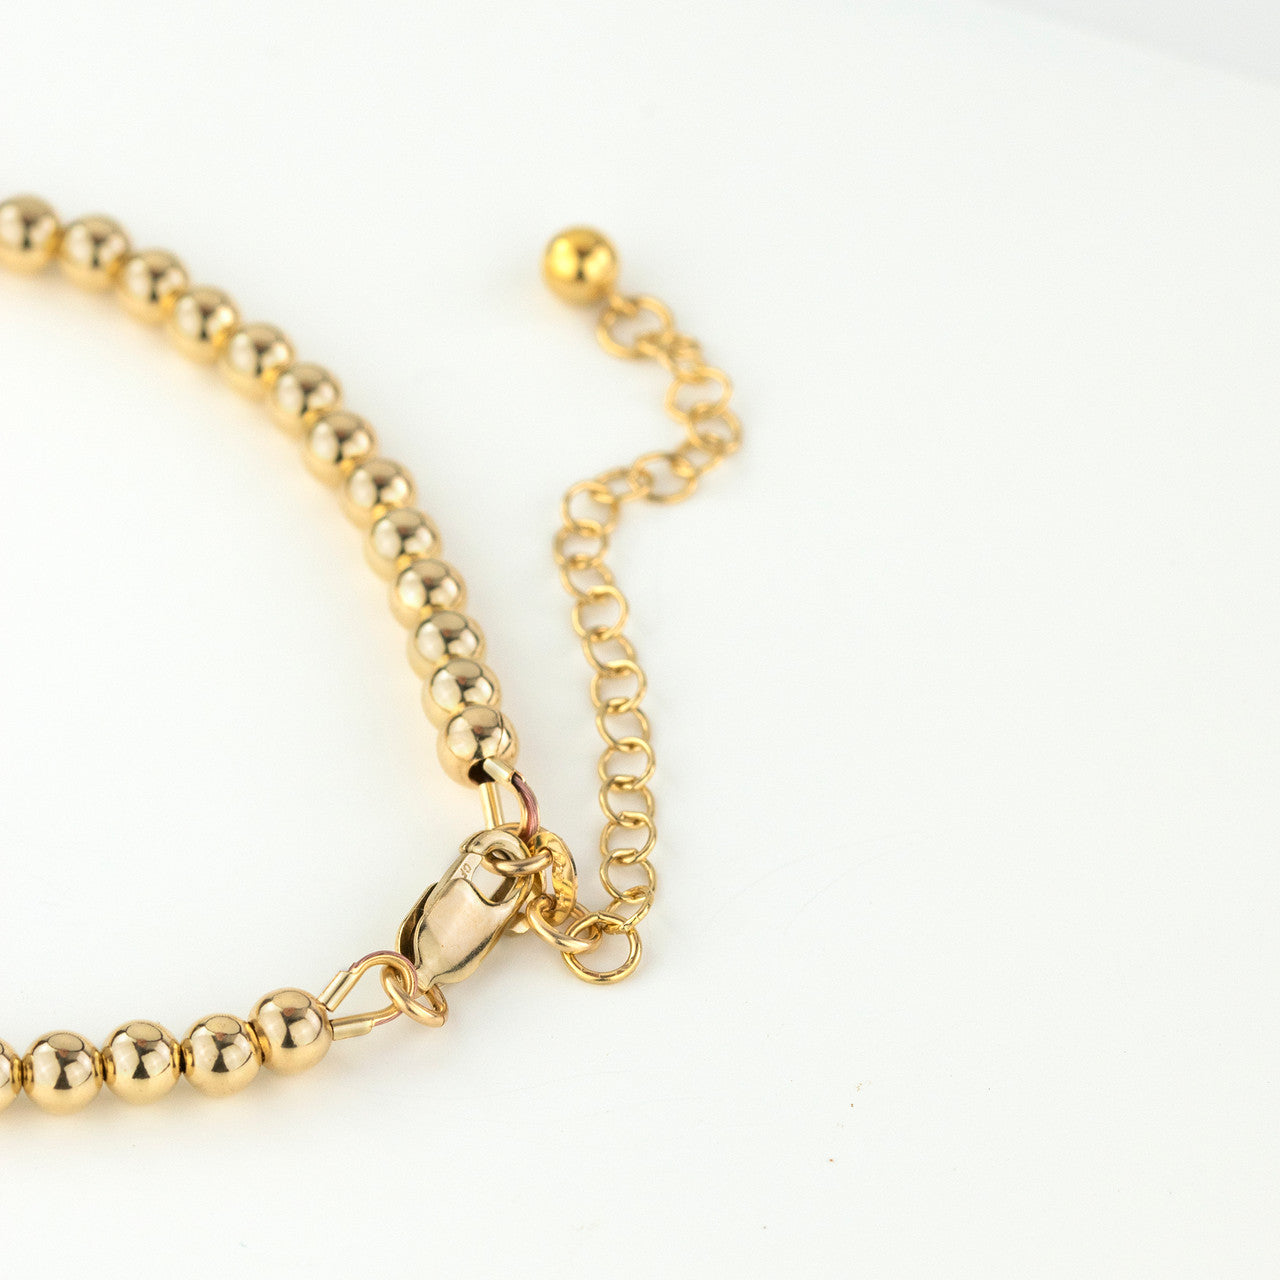 Lobster clasp and extension of gold filled bead and bar bracelet